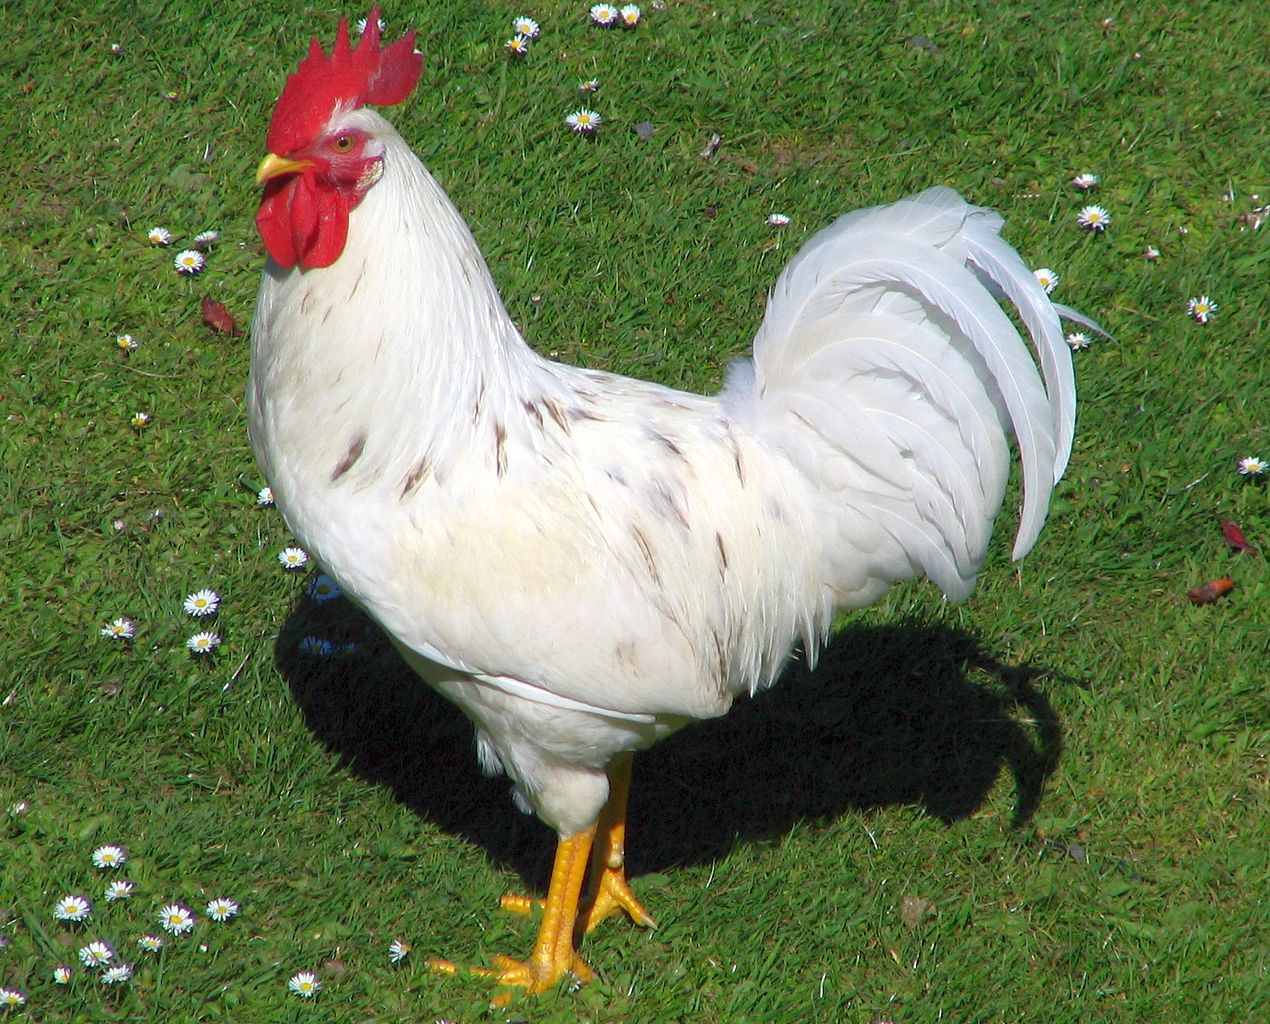 File:Rooster Port Chalmers - Wikimedia Commons